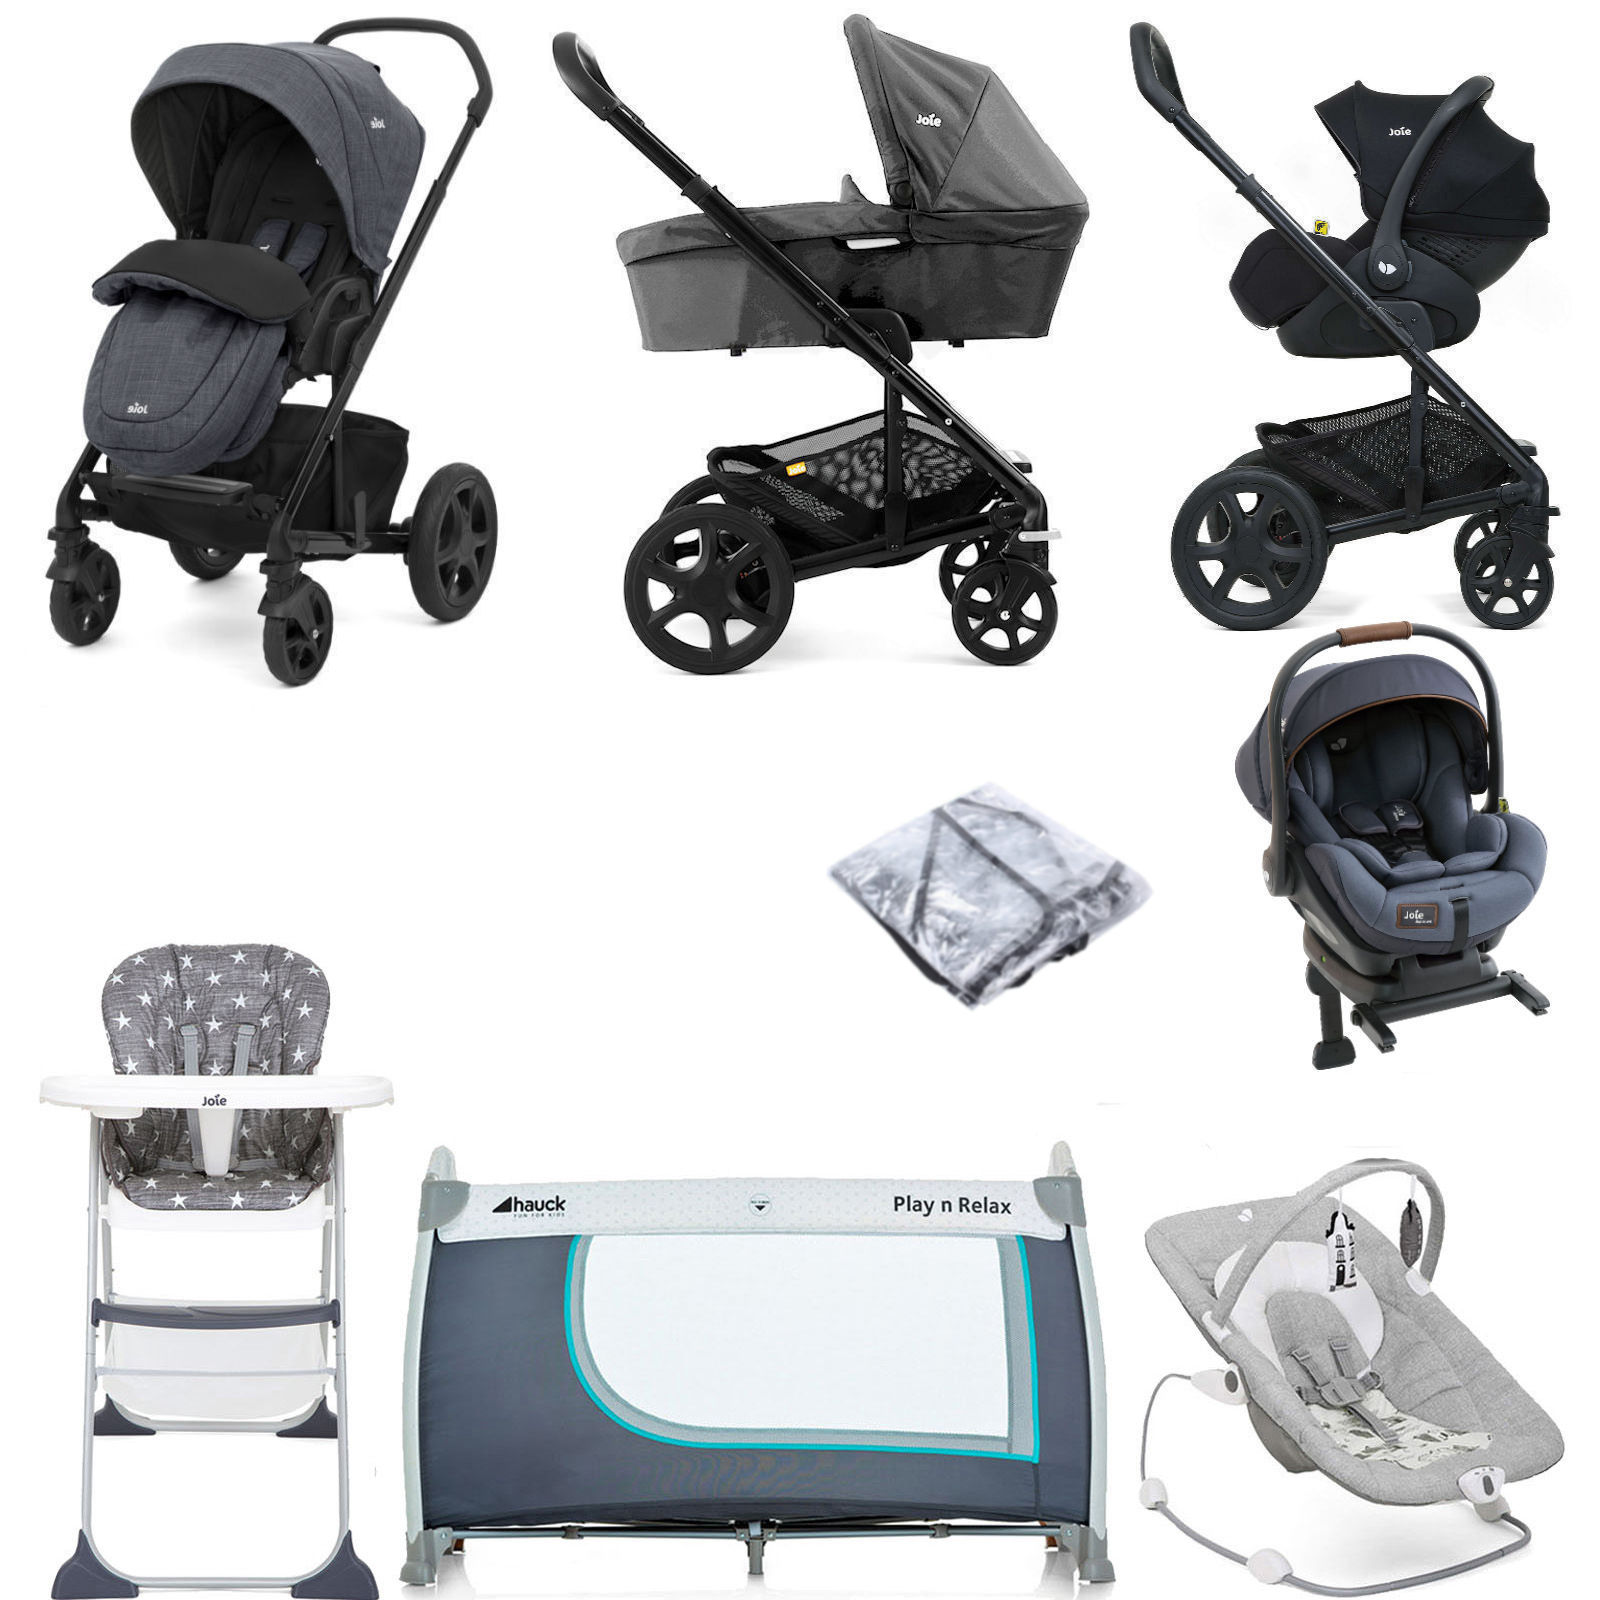 mothercare joie travel system